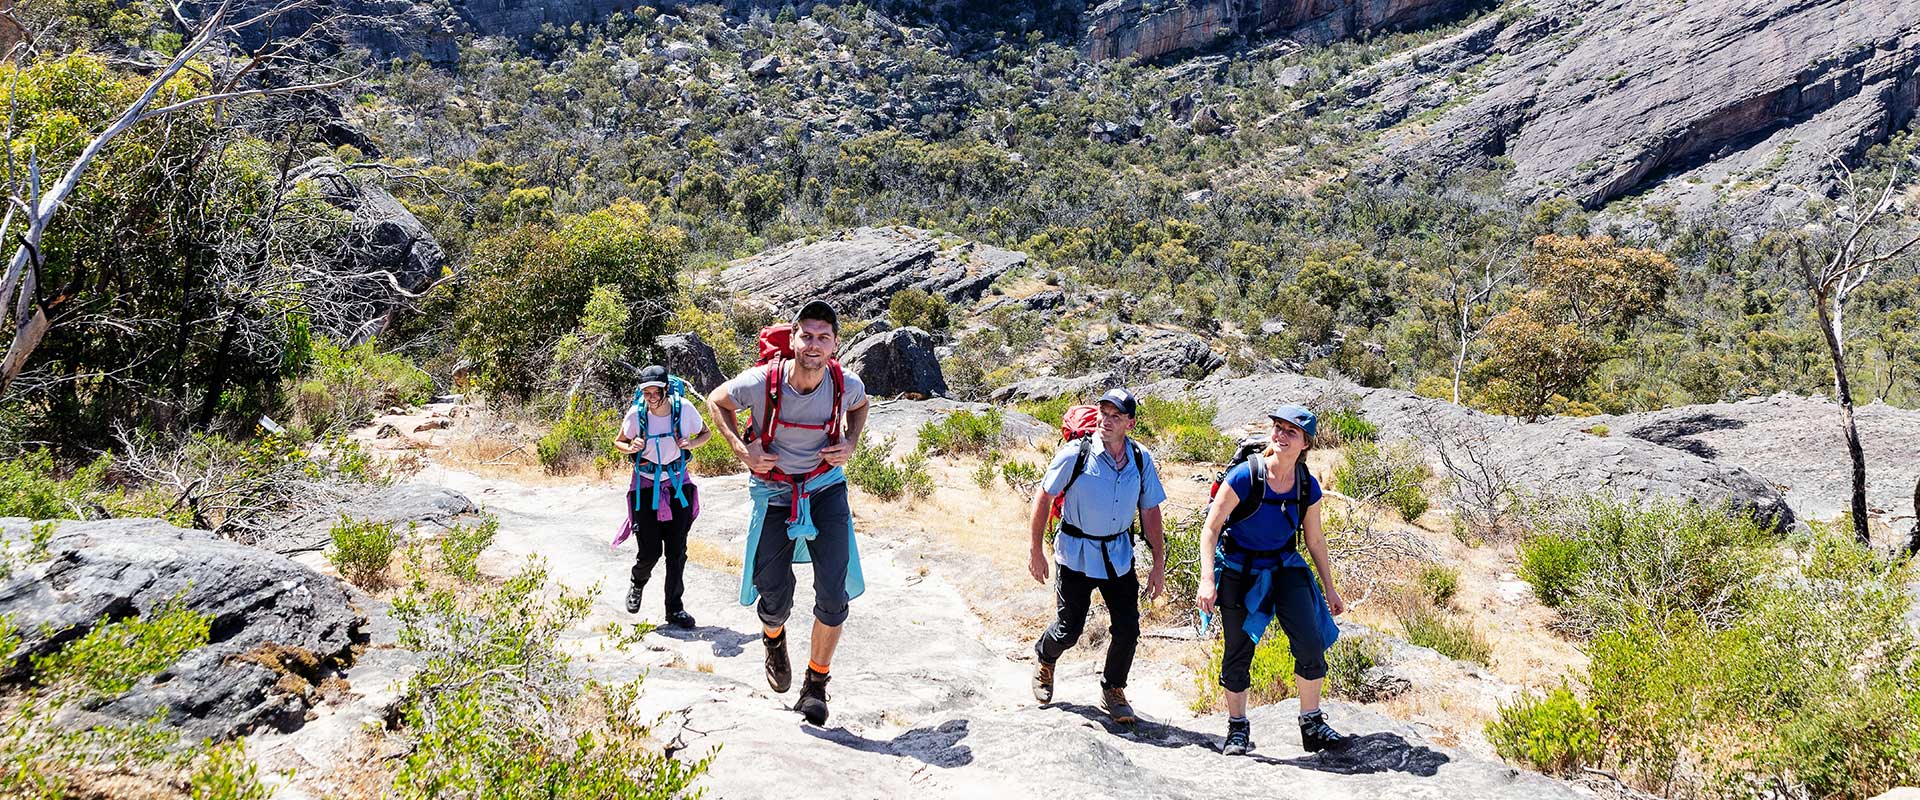 A group of walkers walk along a rocky trail with large cliffs in the background